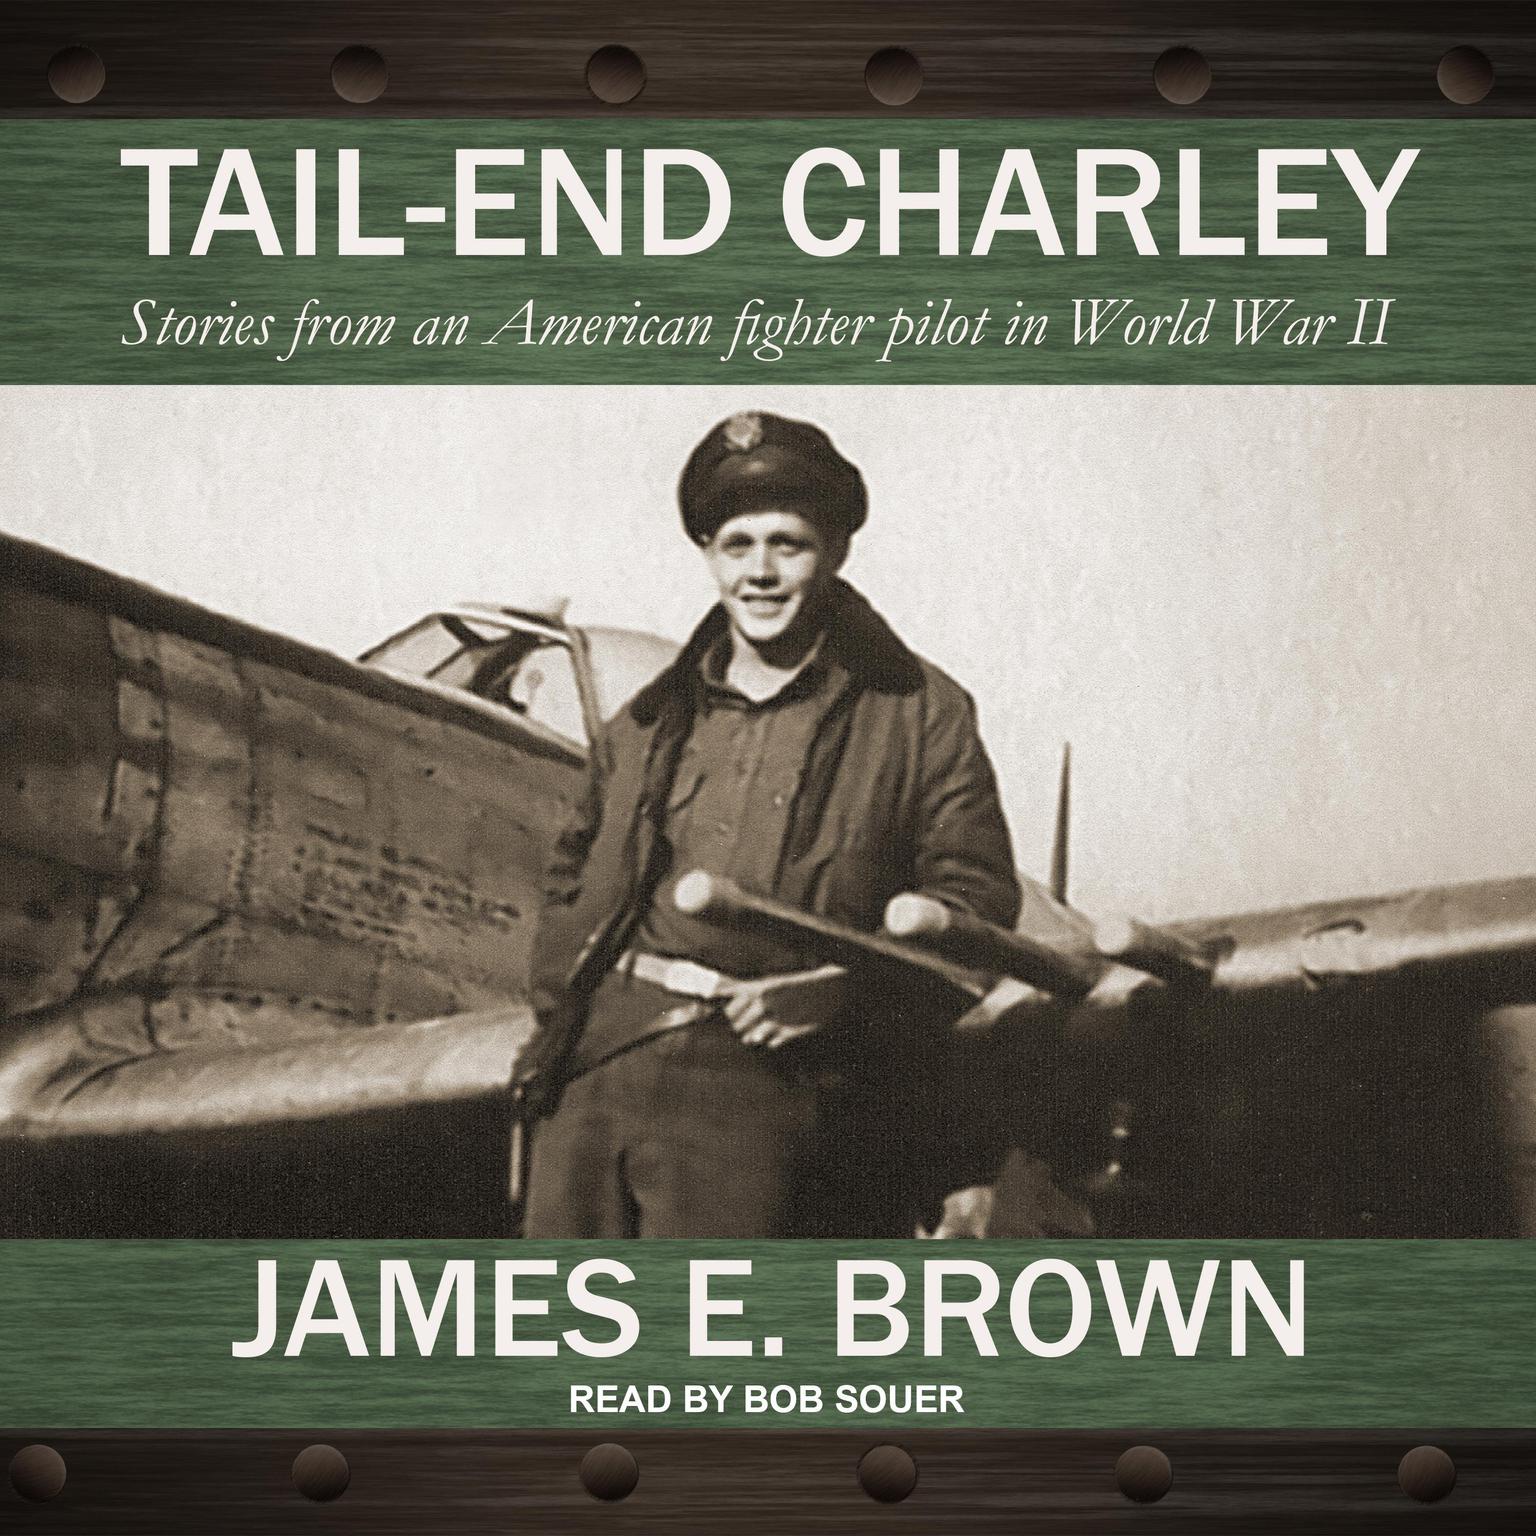 Tail-End Charley: Stories from an American fighter pilot in World War II Audiobook, by James E. Brown